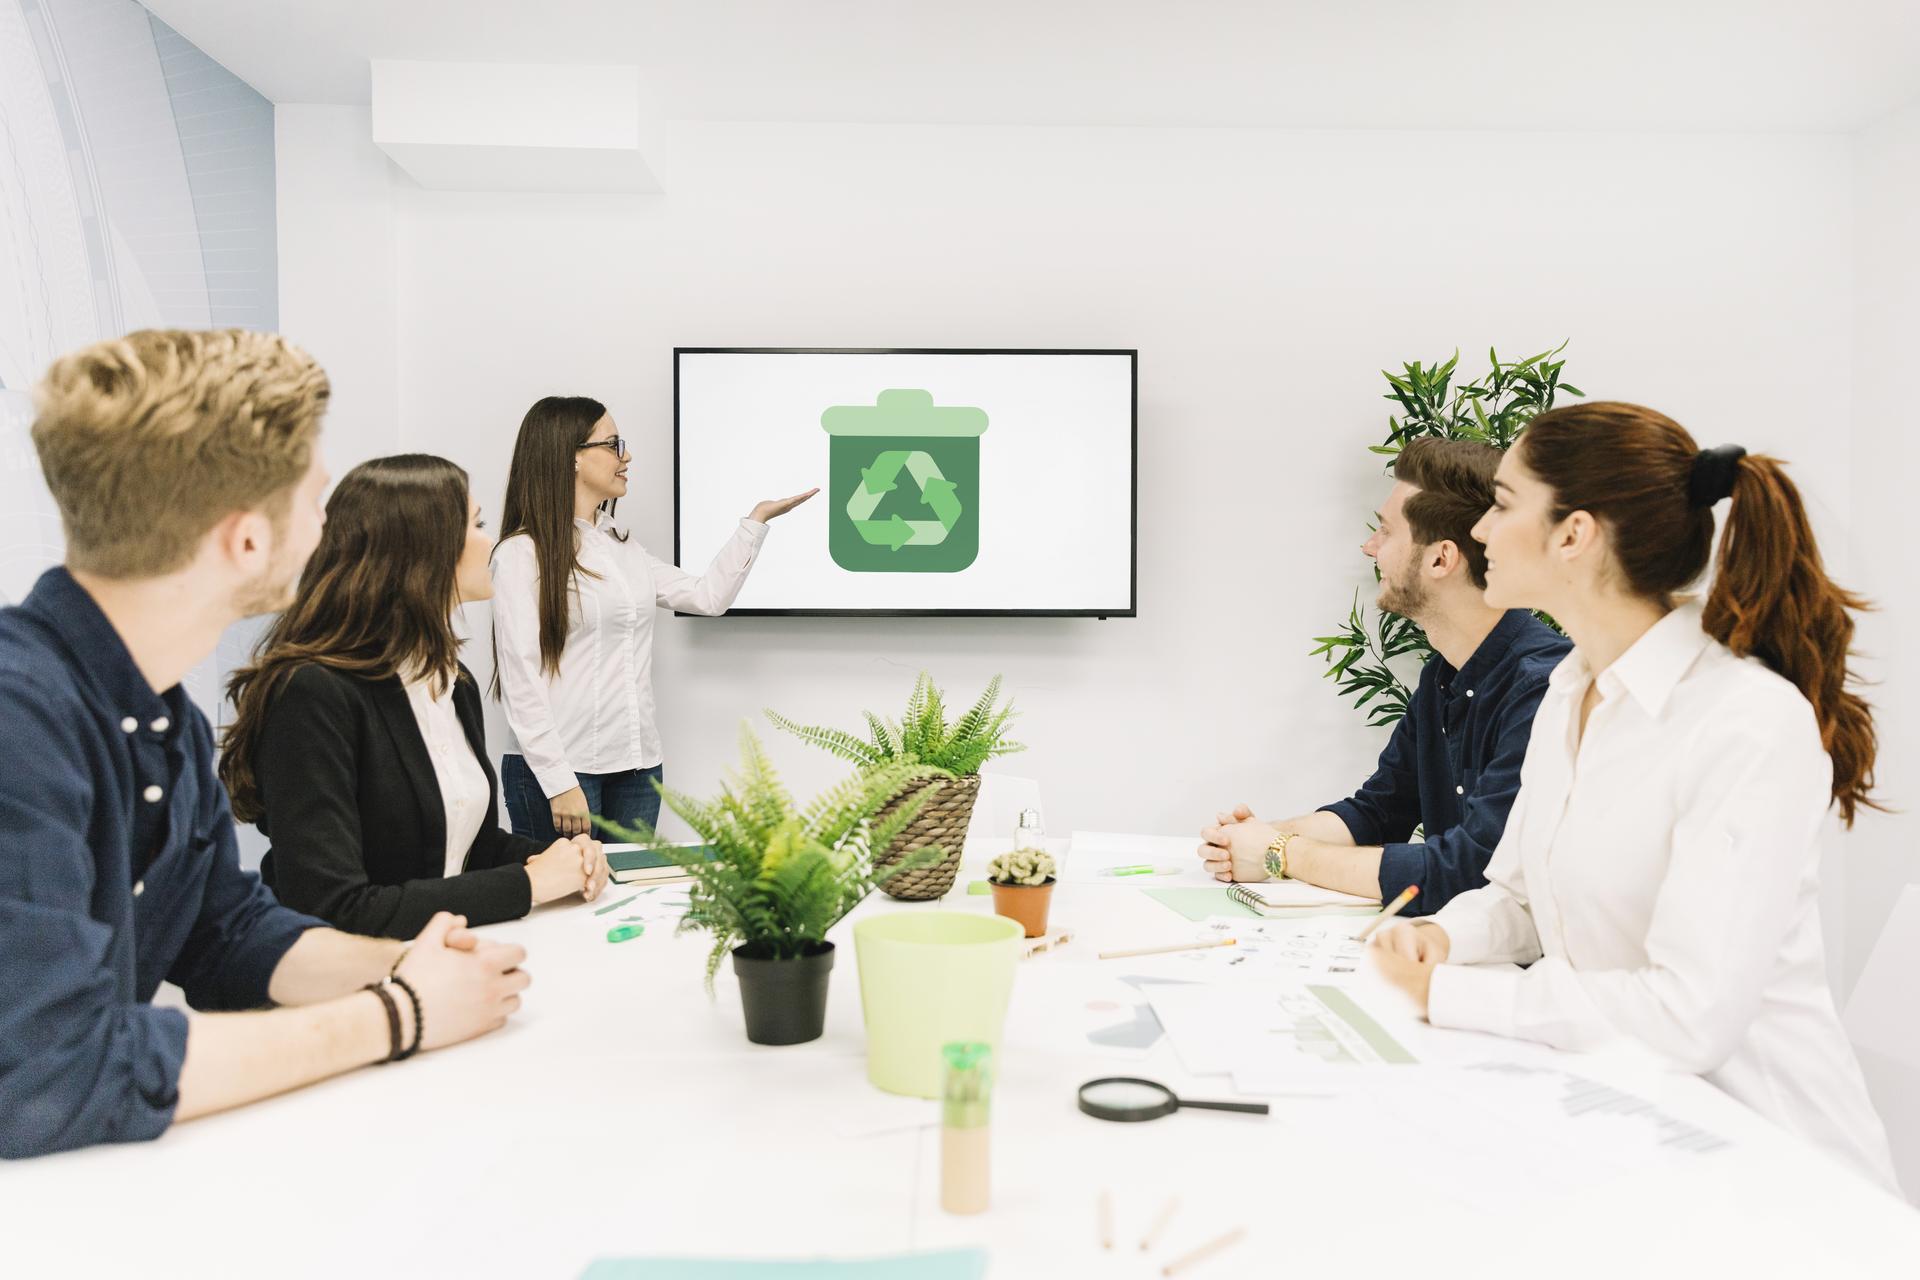 5 Tips To Go Green in The Office